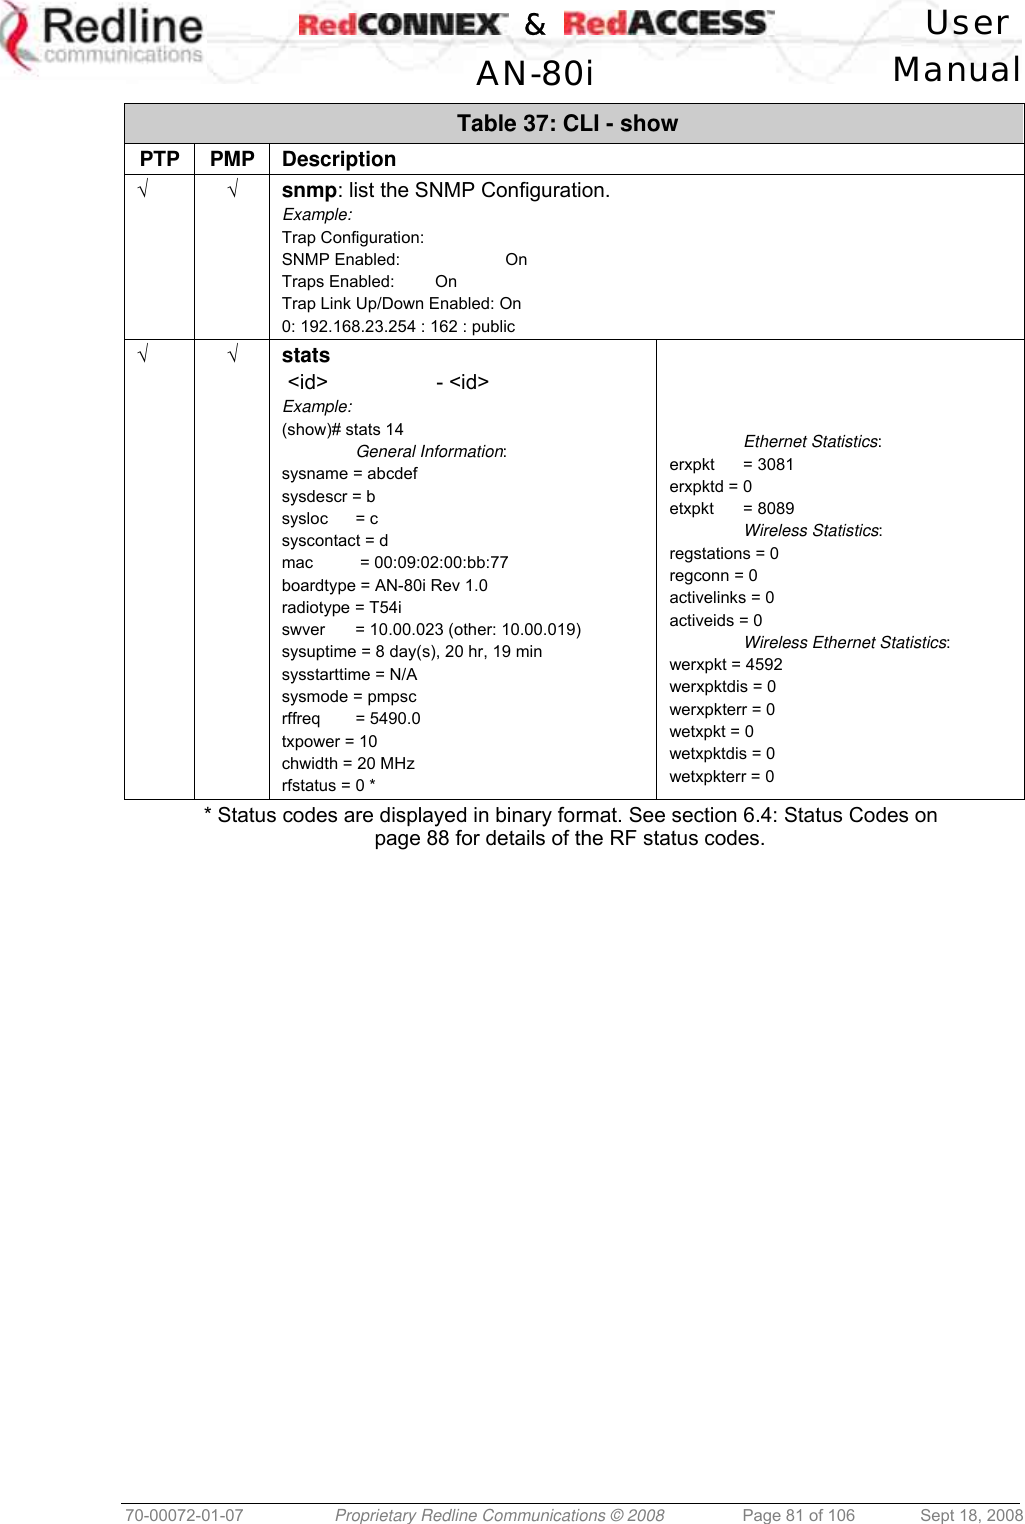    &amp;  User  AN-80i Manual  70-00072-01-07  Proprietary Redline Communications © 2008  Page 81 of 106  Sept 18, 2008 Table 37: CLI - show PTP PMP Description √ √ snmp: list the SNMP Configuration. Example: Trap Configuration: SNMP Enabled:    On Traps Enabled:   On Trap Link Up/Down Enabled: On 0: 192.168.23.254 : 162 : public √ √ stats  &lt;id&gt;     - &lt;id&gt; Example: (show)# stats 14  General Information: sysname = abcdef sysdescr = b sysloc = c syscontact = d mac   = 00:09:02:00:bb:77 boardtype = AN-80i Rev 1.0 radiotype = T54i swver  = 10.00.023 (other: 10.00.019) sysuptime = 8 day(s), 20 hr, 19 min sysstarttime = N/A sysmode = pmpsc rffreq = 5490.0 txpower = 10 chwidth = 20 MHz rfstatus = 0 *       Ethernet Statistics: erxpkt = 3081 erxpktd = 0 etxpkt = 8089  Wireless Statistics: regstations = 0 regconn = 0 activelinks = 0 activeids = 0  Wireless Ethernet Statistics: werxpkt = 4592 werxpktdis = 0 werxpkterr = 0 wetxpkt = 0 wetxpktdis = 0 wetxpkterr = 0 * Status codes are displayed in binary format. See section 6.4: Status Codes on page 88 for details of the RF status codes.  